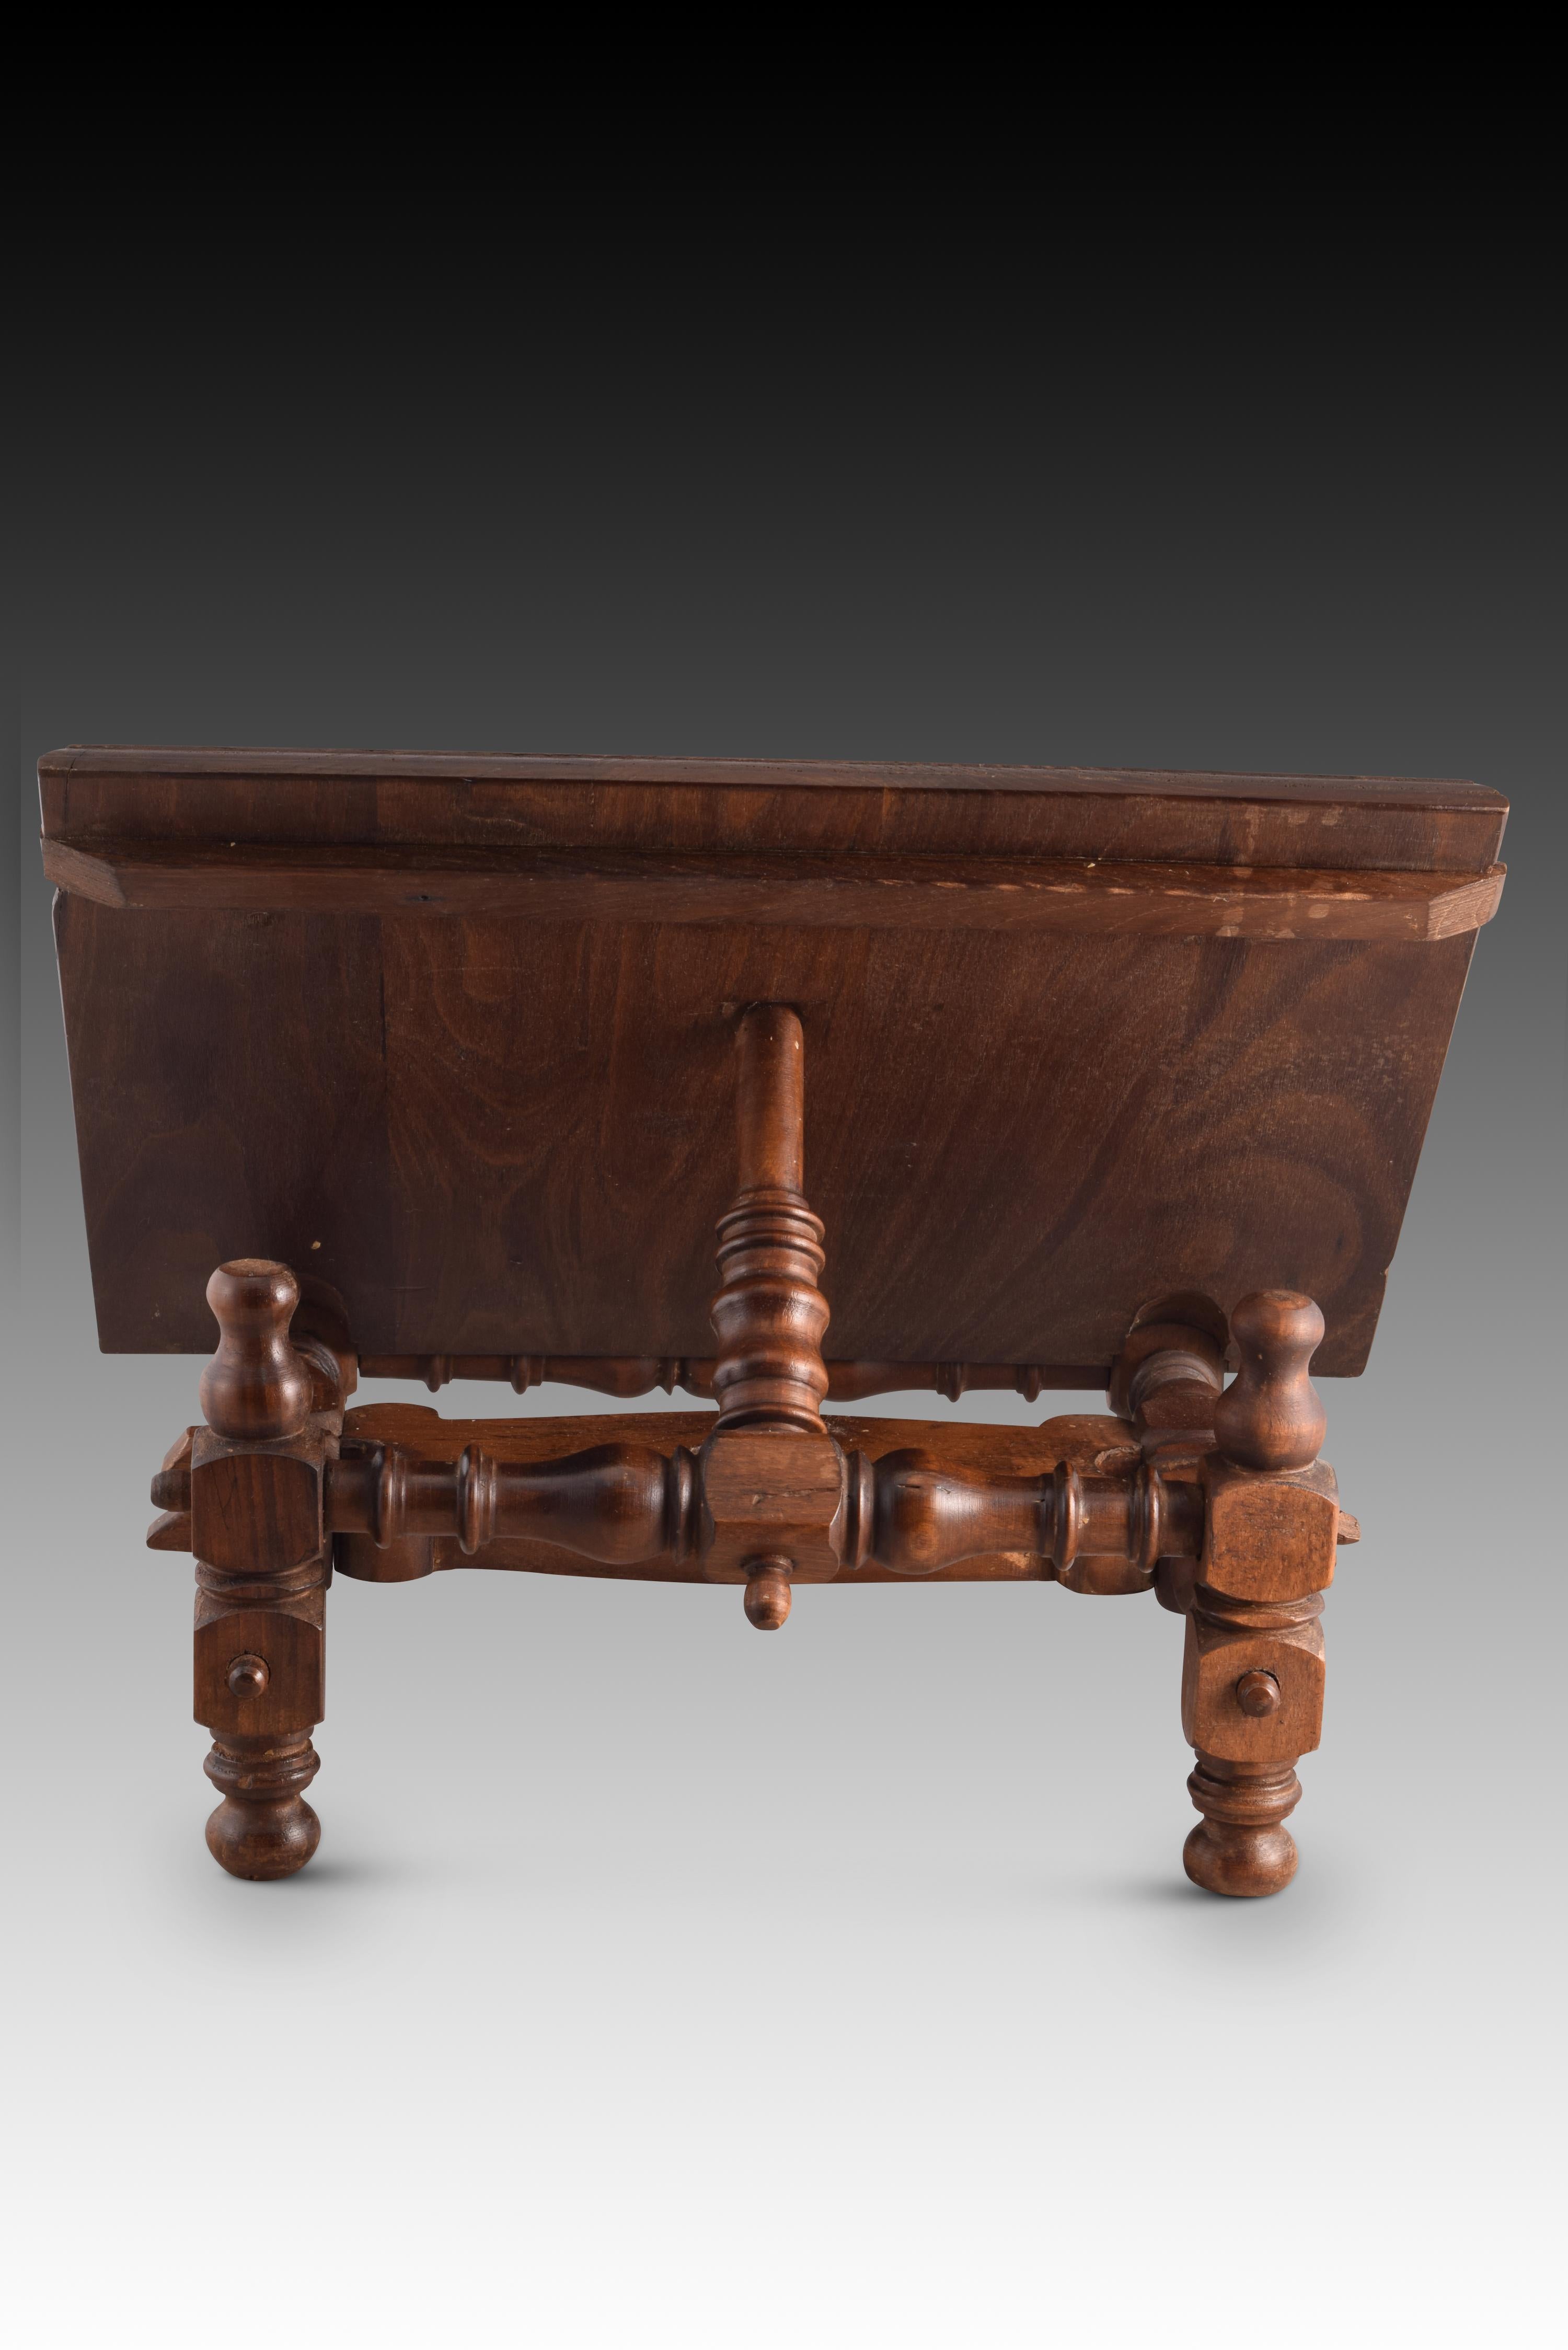 Lectern. Carved and turned wood. 20th century.

Table lectern made of wood in the same colour, with the base and legs turned (drawing discs and carved shapes) reminiscent in certain details of pieces from the 17th and 18th centuries. The boards